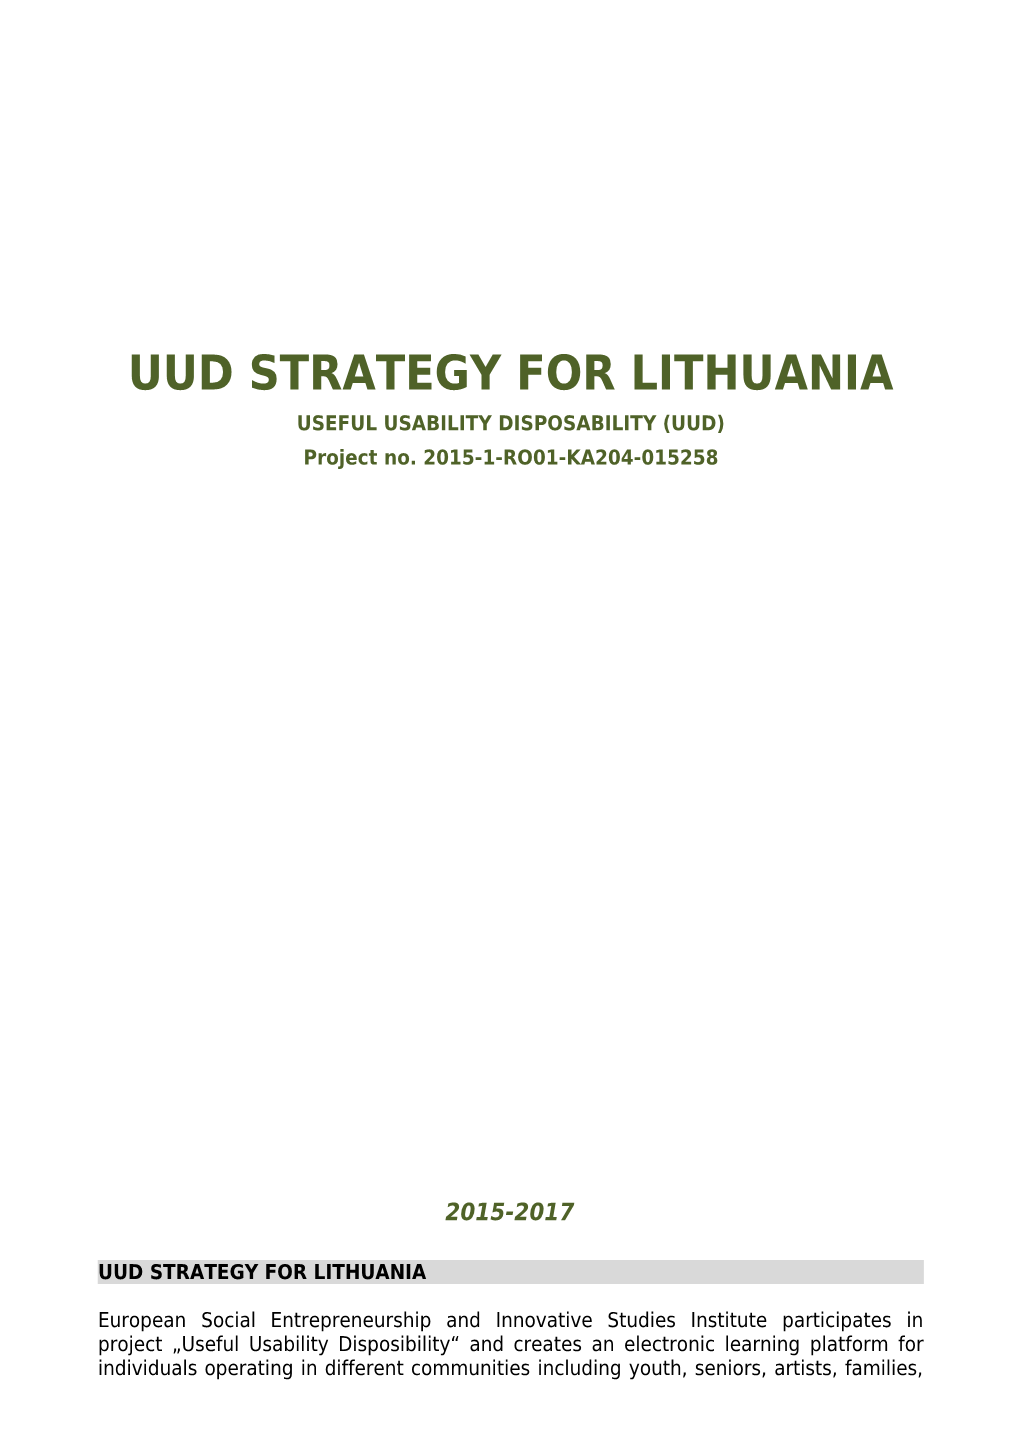 Uud Strategy for Lithuania